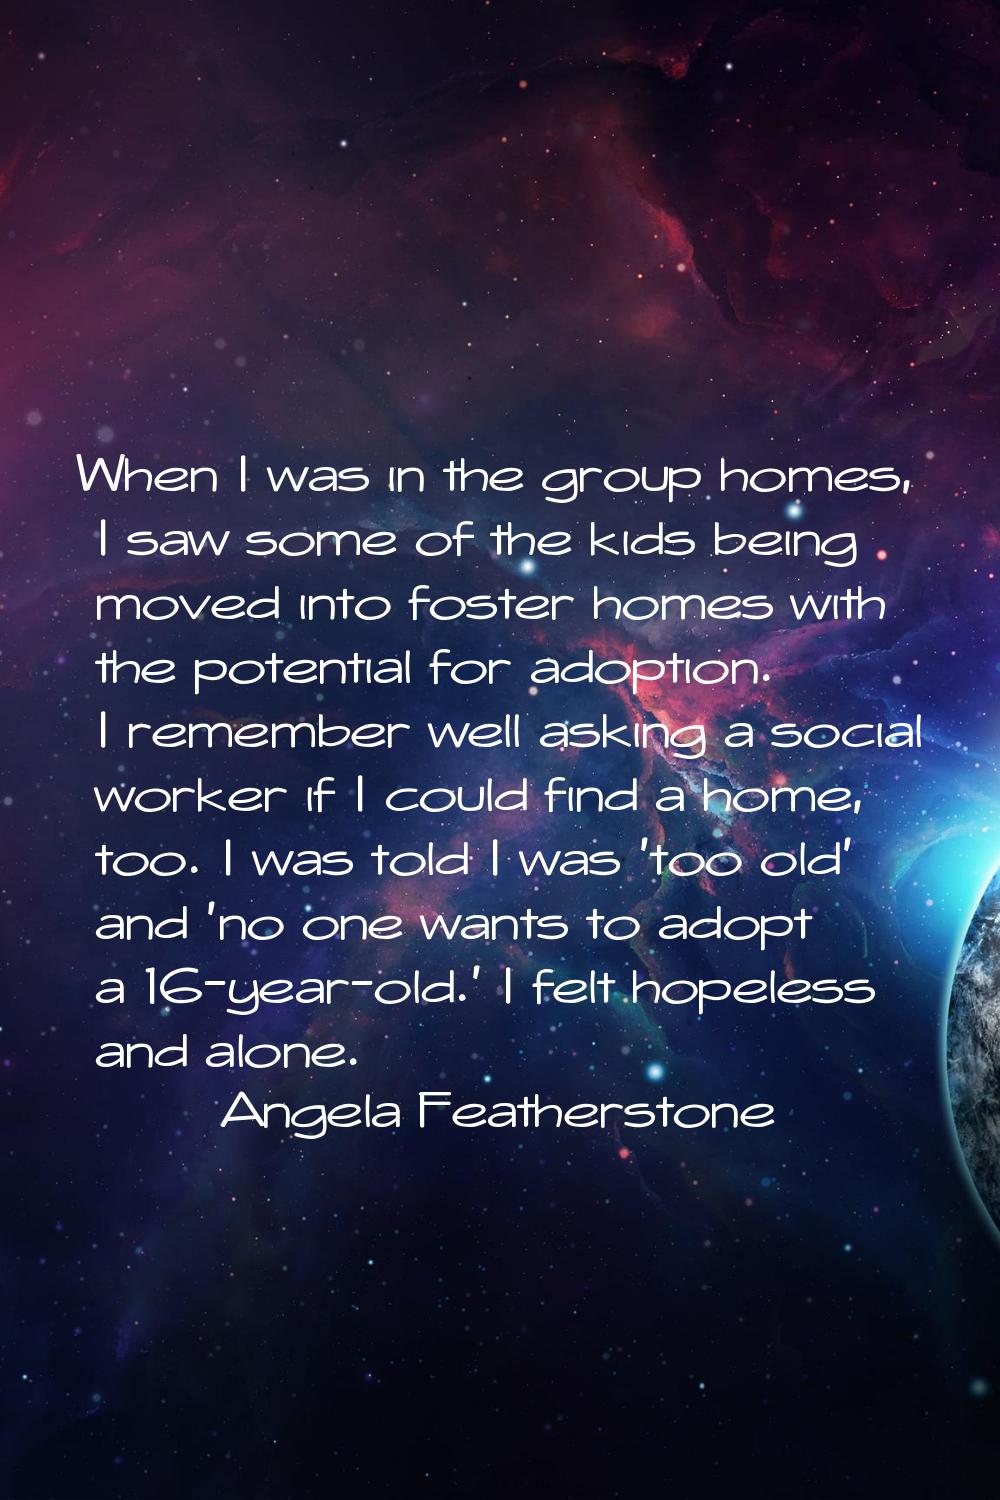 When I was in the group homes, I saw some of the kids being moved into foster homes with the potent